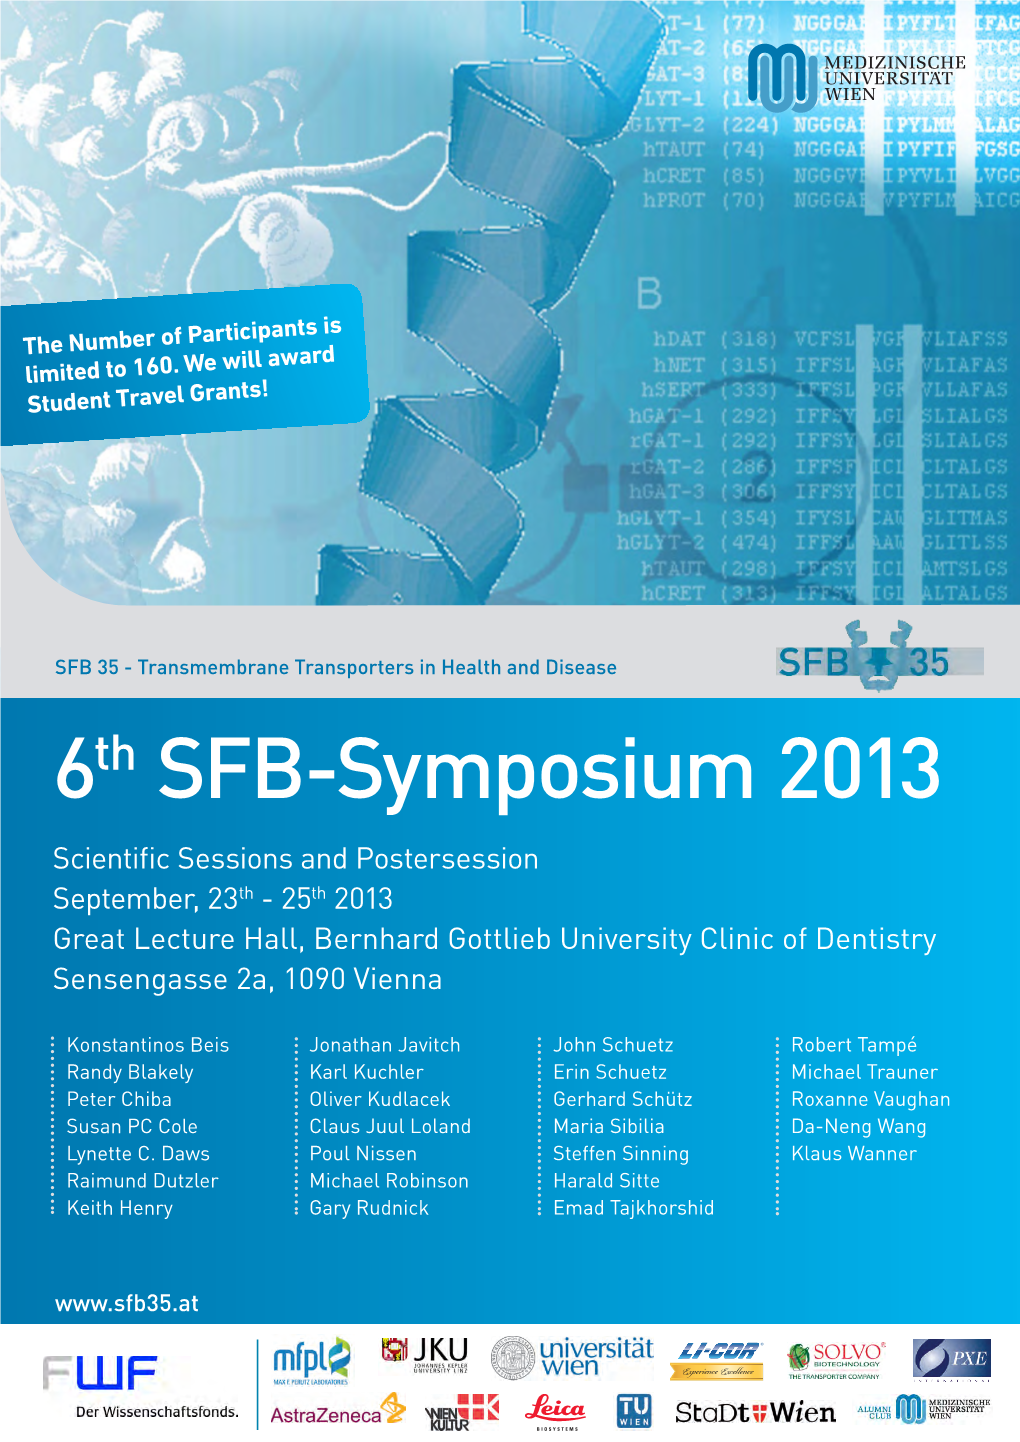 Scientific Sessions and Postersession September, 23Th - 25Th 2013 Great Lecture Hall, Bernhard Gottlieb University Clinic of Dentistry Sensengasse 2A, 1090 Vienna